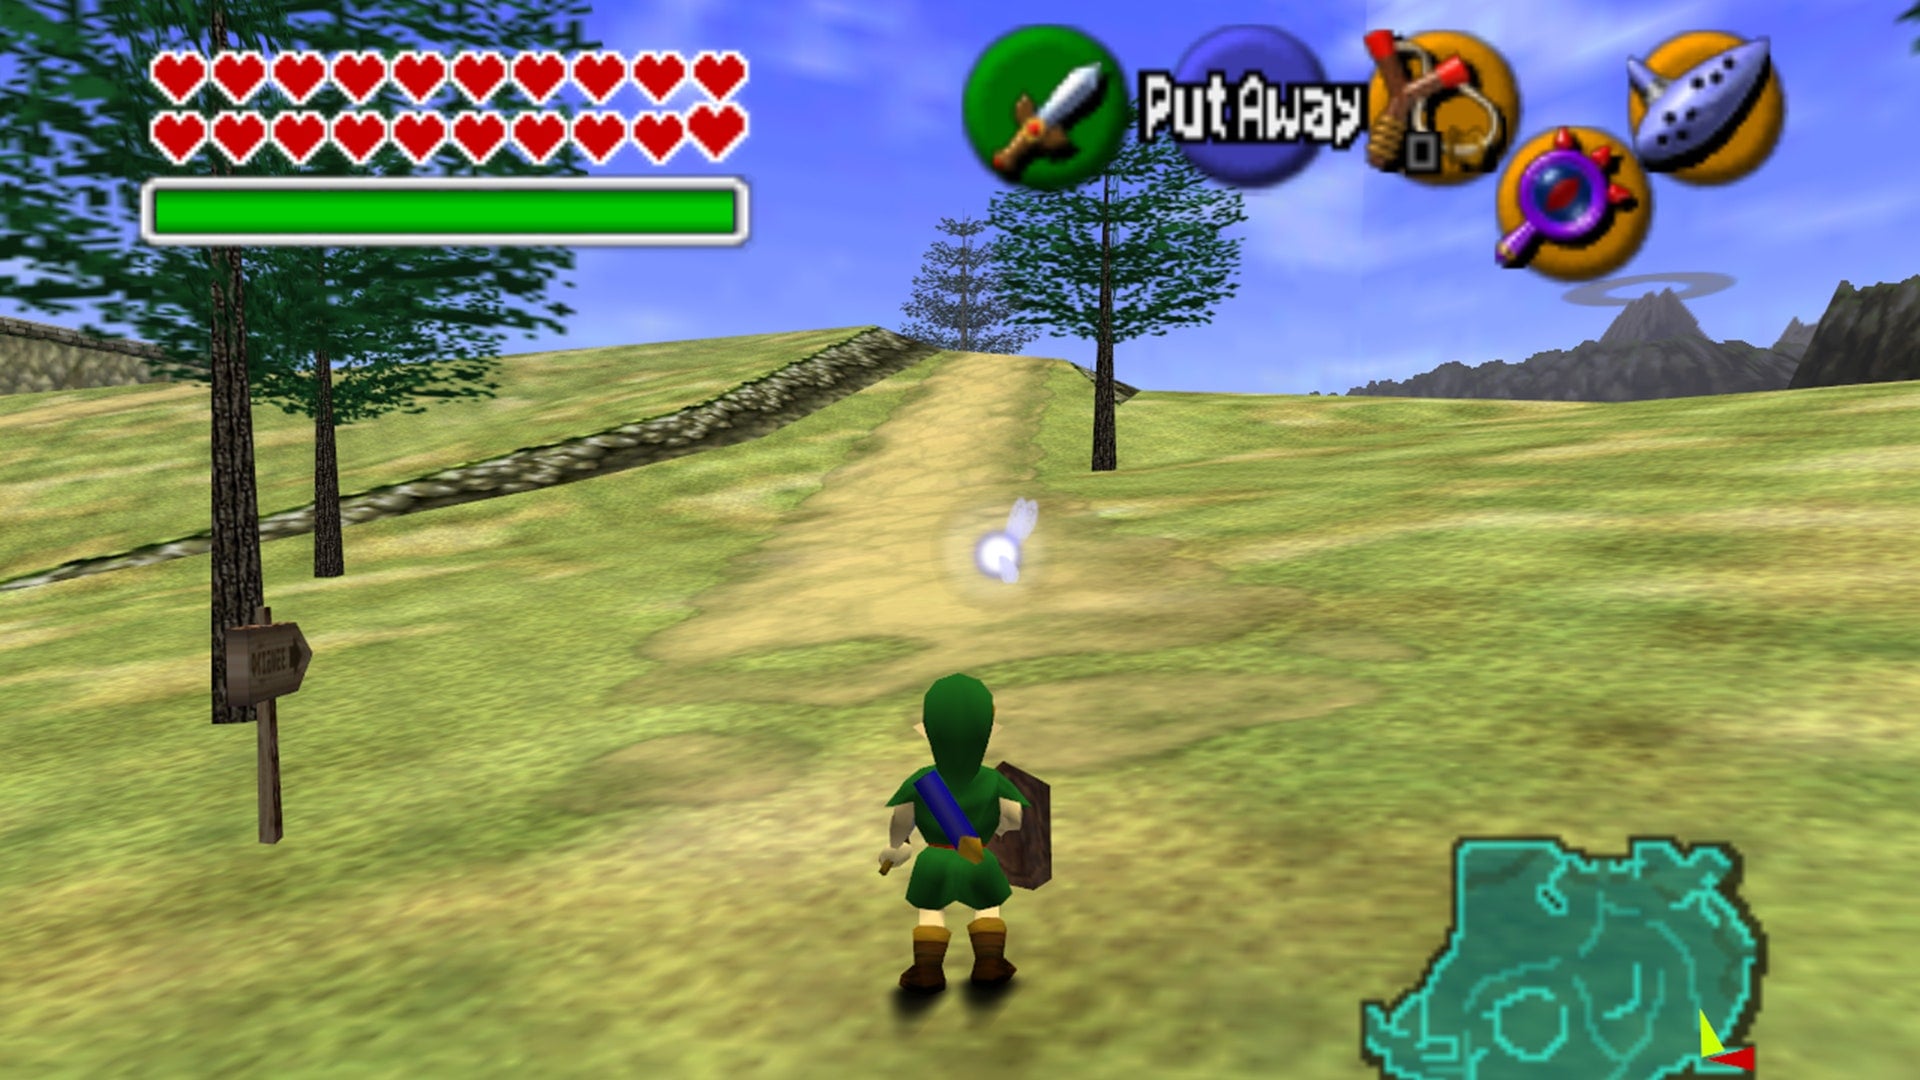 Expansive View of Hyrule Field in The Legend of Zelda: Ocarina of Time